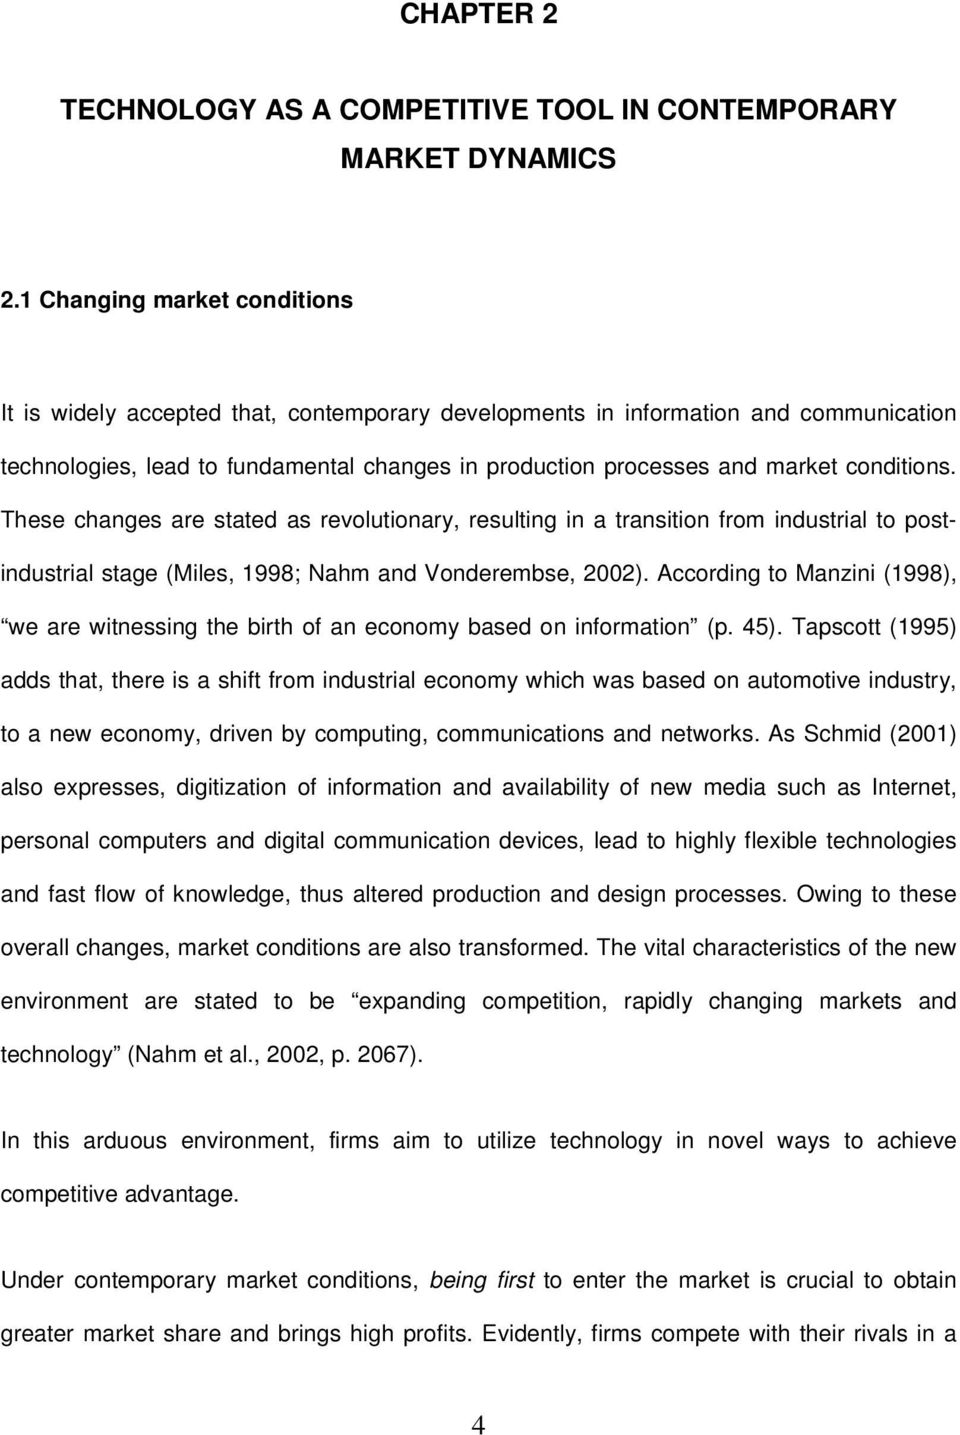 conditions. These changes are stated as revolutionary, resulting in a transition from industrial to postindustrial stage (Miles, 1998; Nahm and Vonderembse, 2002).